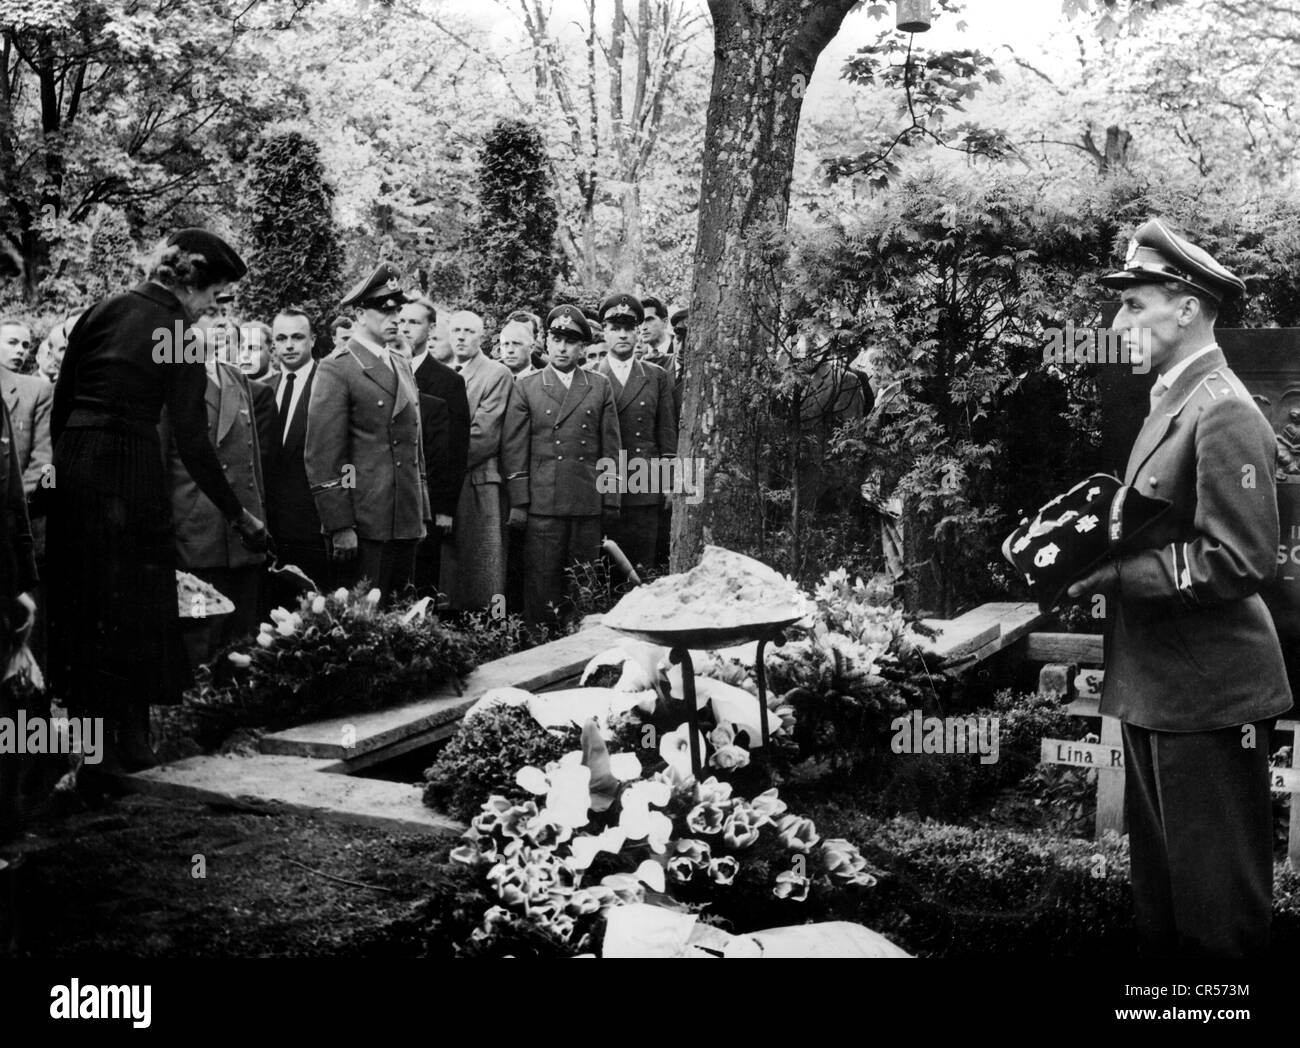 Baer, Heinz, 25.3.1913 - 28.4.1957, German aviator, death, funeral, Frankfurt on the Main, 3.5.1957, coffin, the famous female pilot Hanna Reitsch (left) paying her last respects at the grave, Stock Photo